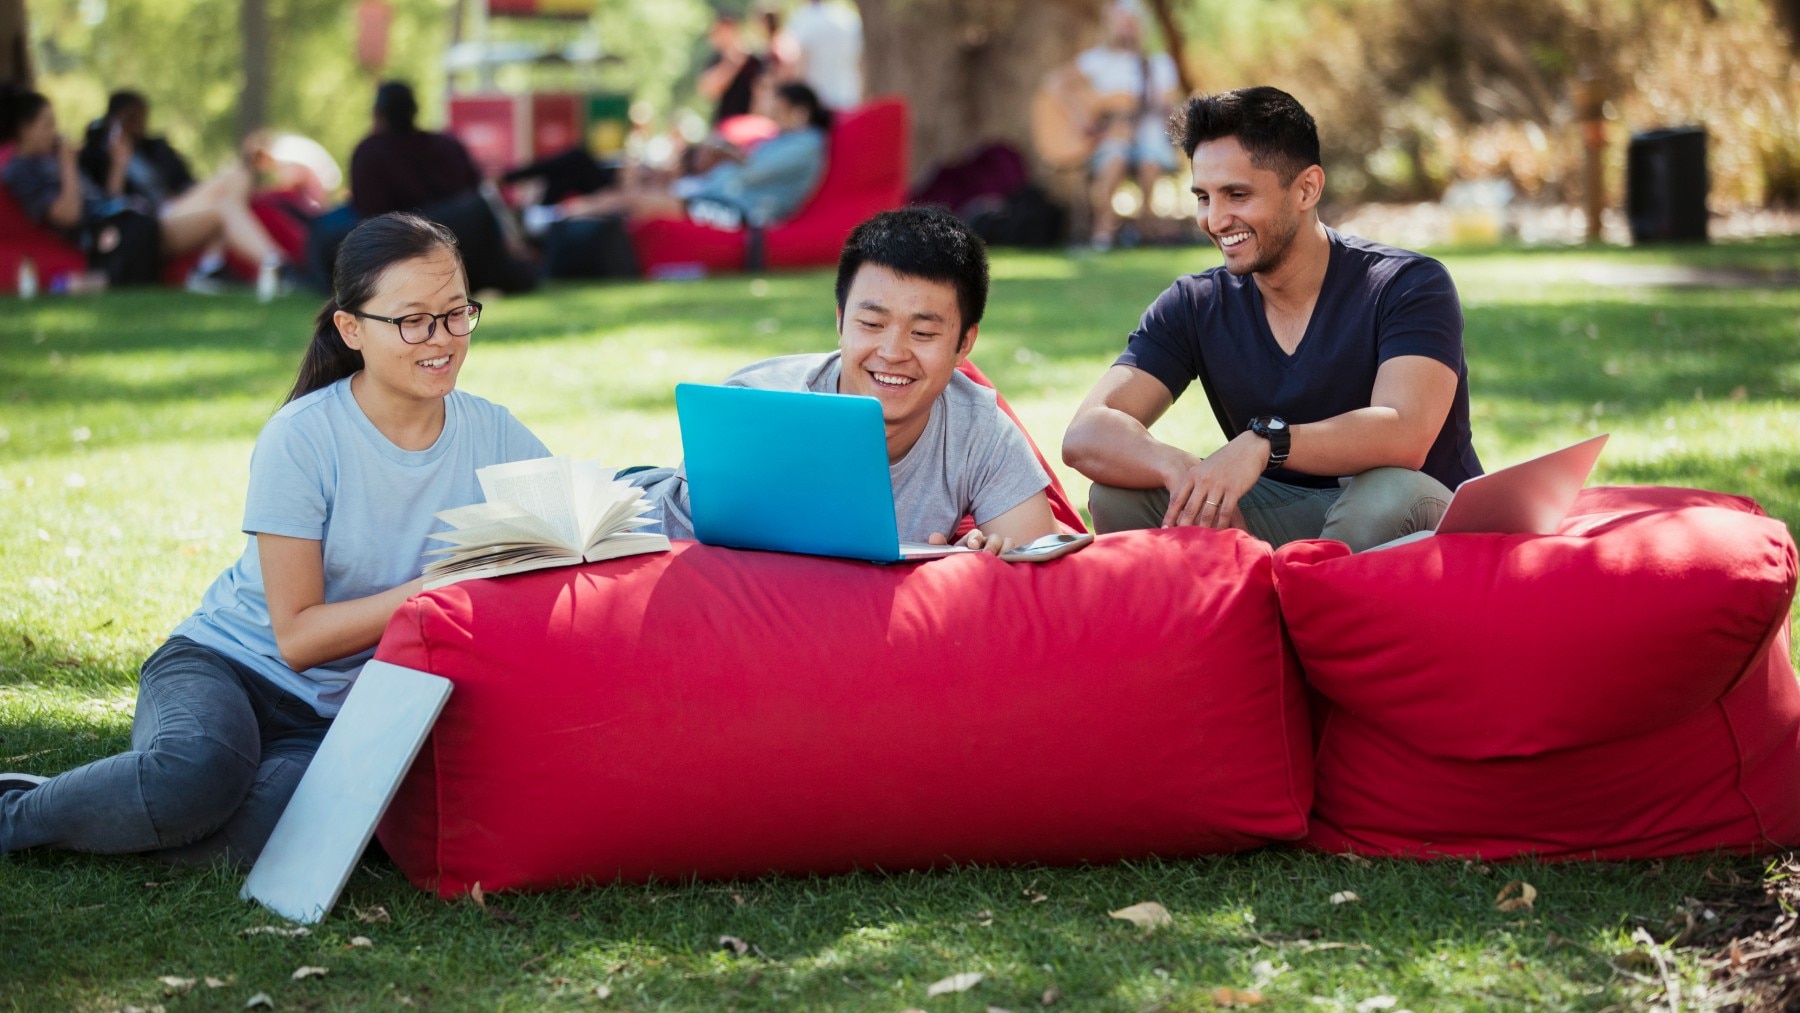 A group of multi ethnic students sitting together on bean bags outdoors on a sunny day in 